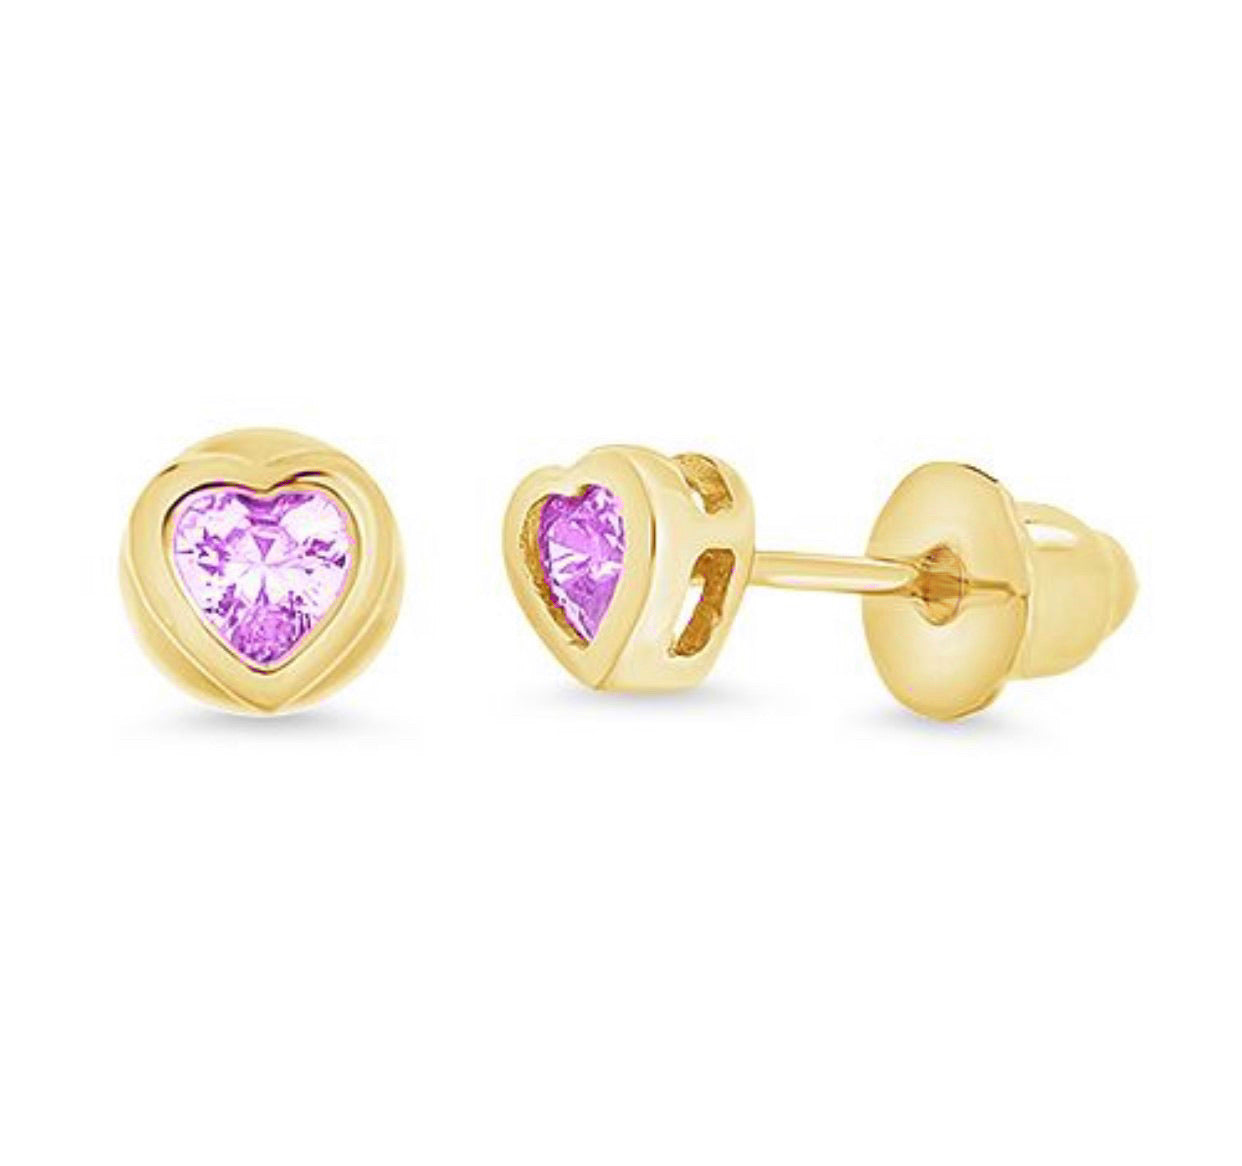 14K Gold Plated, 925 Sterling Silver CZ Small Heart Push Back Earring For Kids, Teens